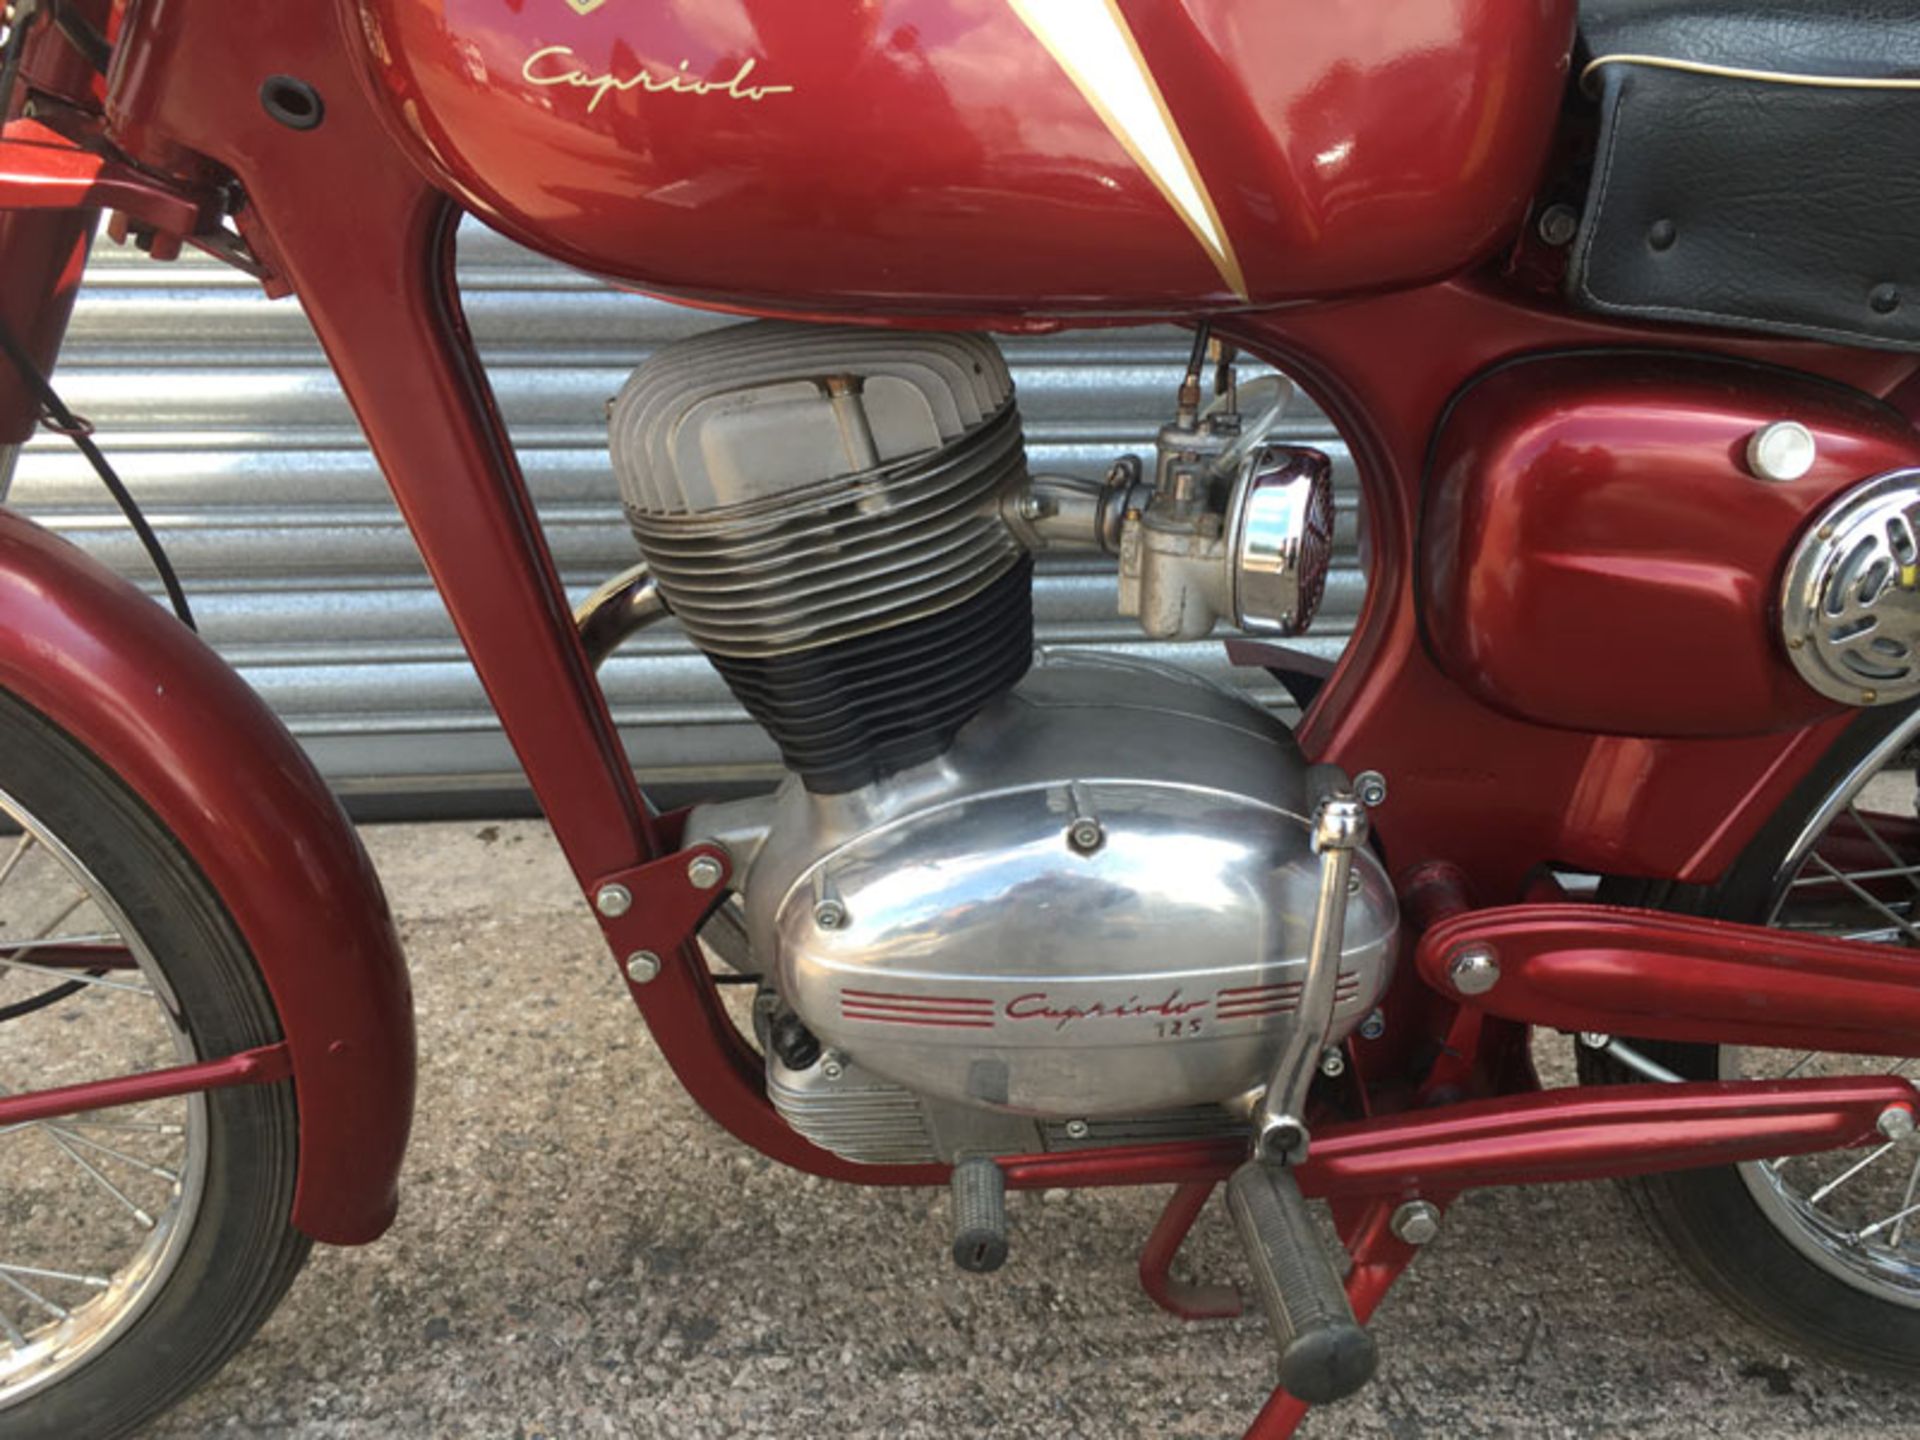 1964 Capriolo Sport 125 - Image 4 of 6